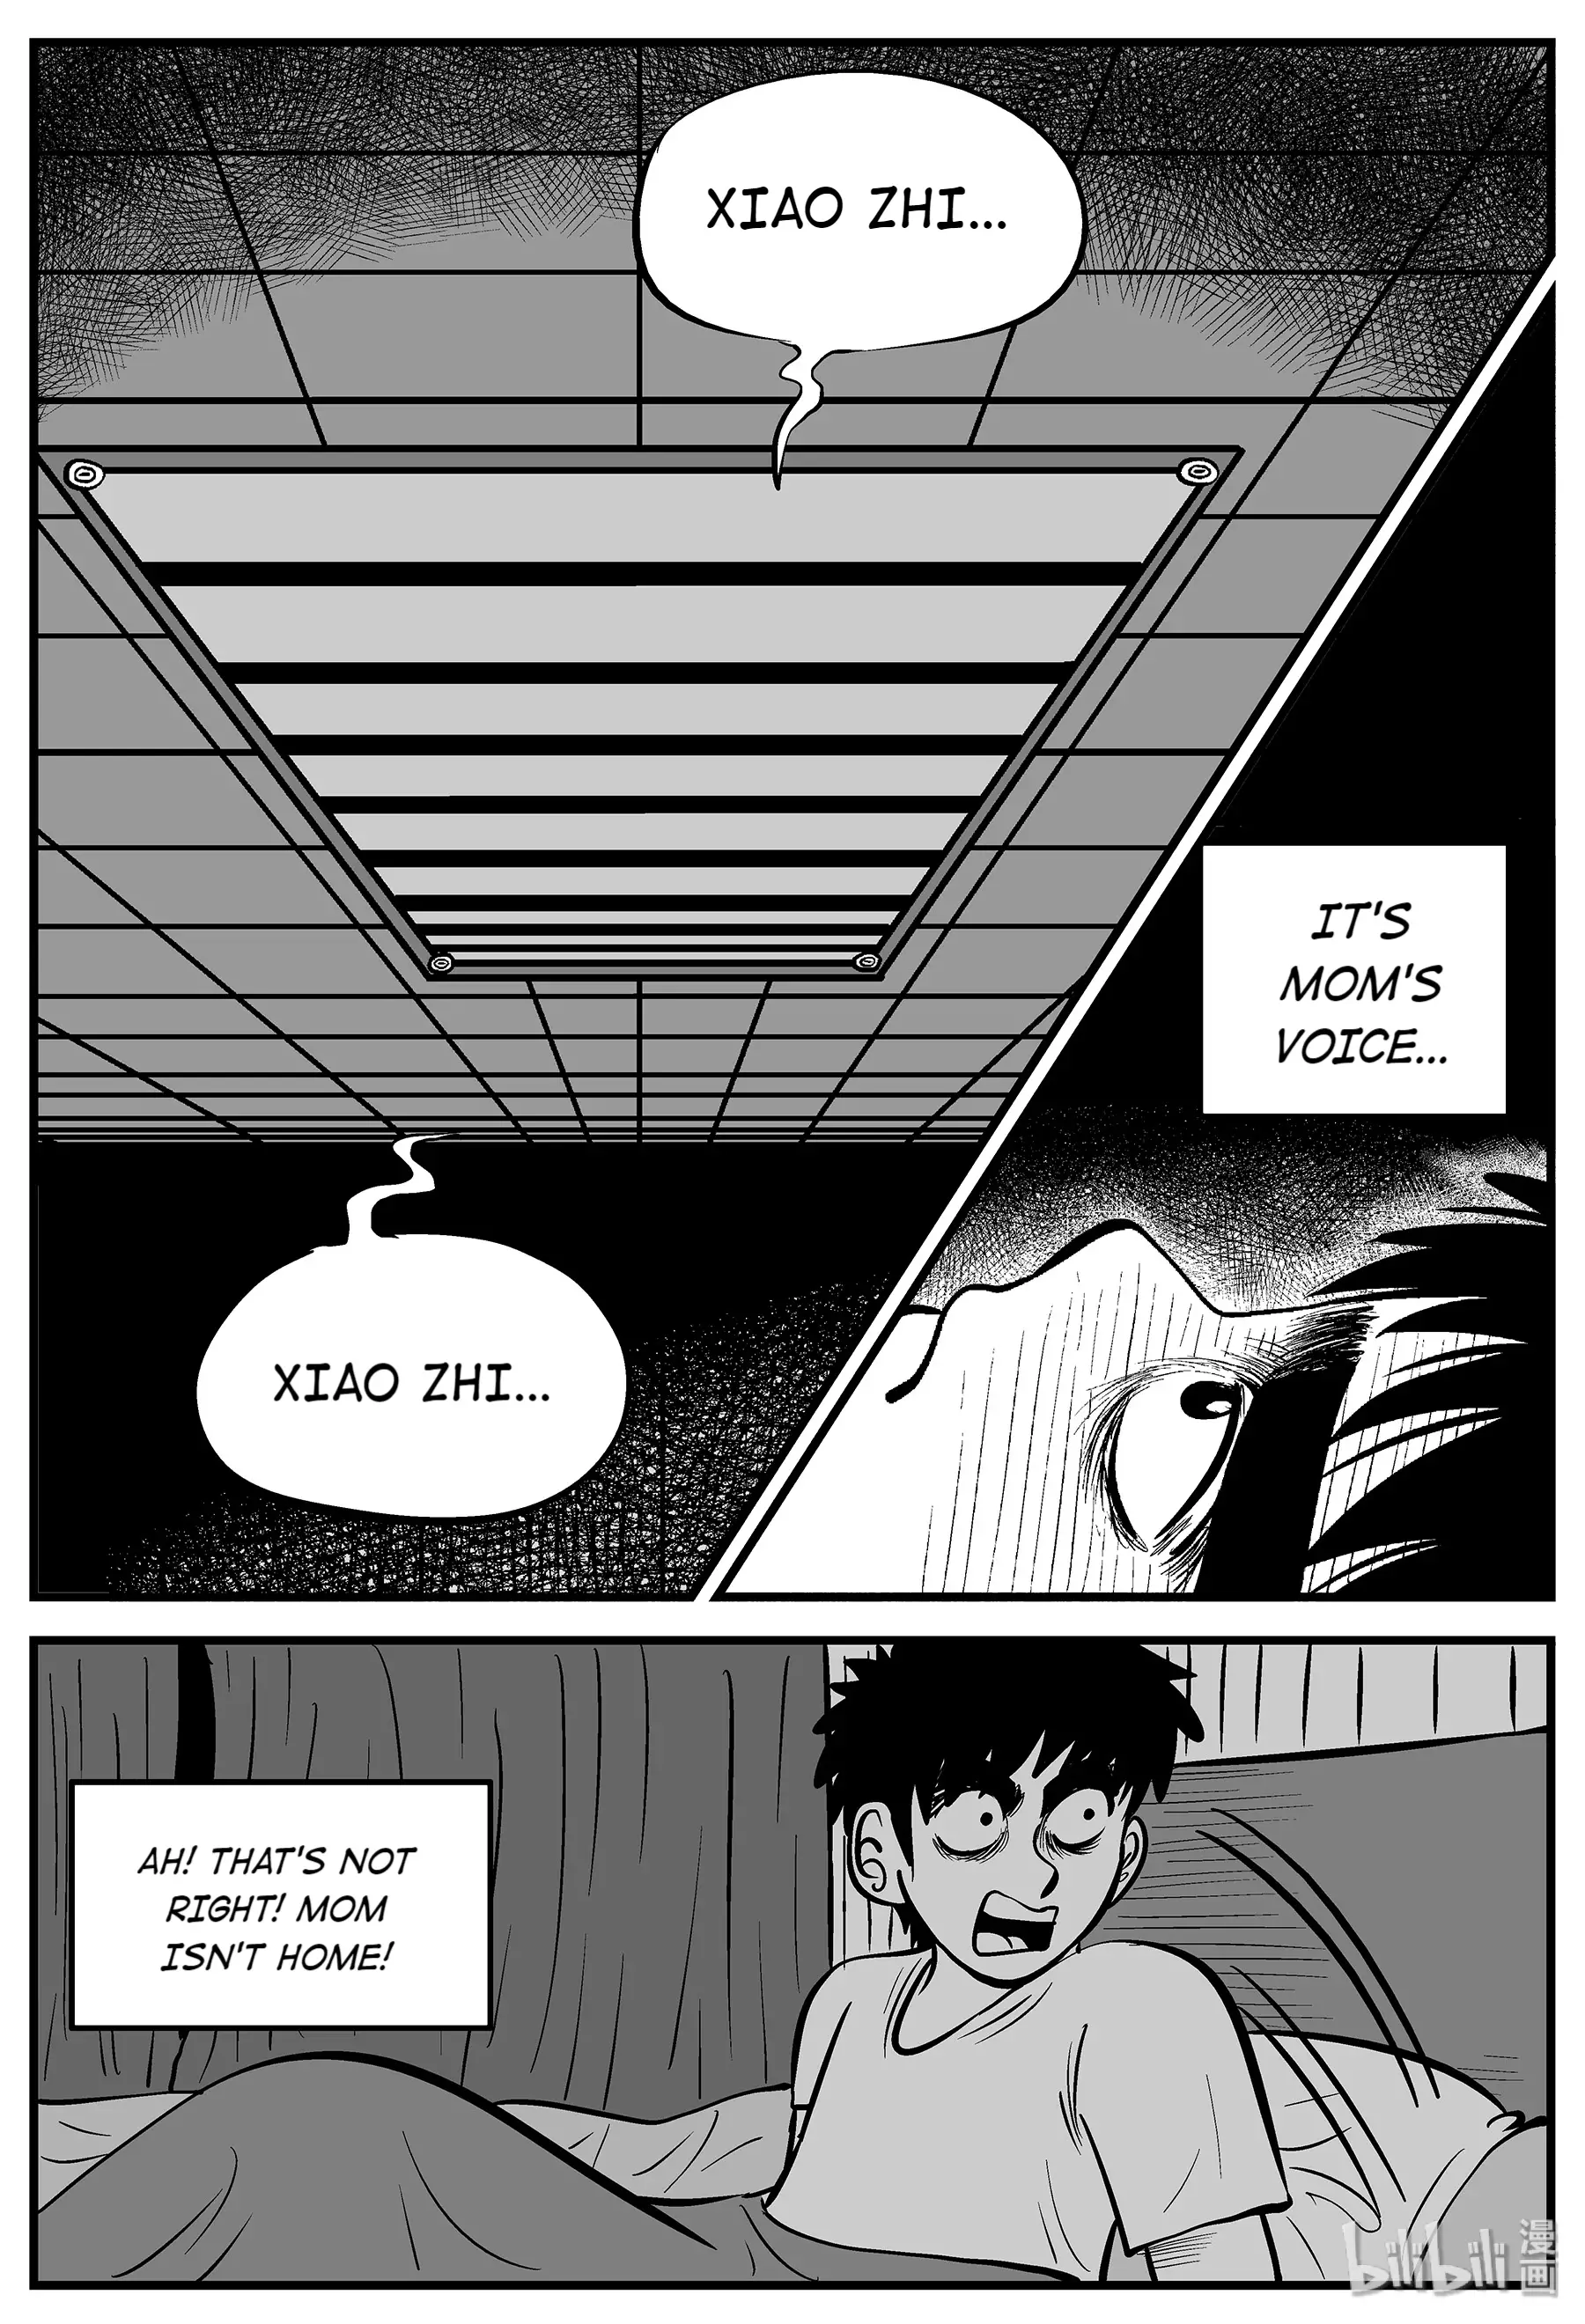 Strange Tales Of Xiao Zhi - 6 page 18